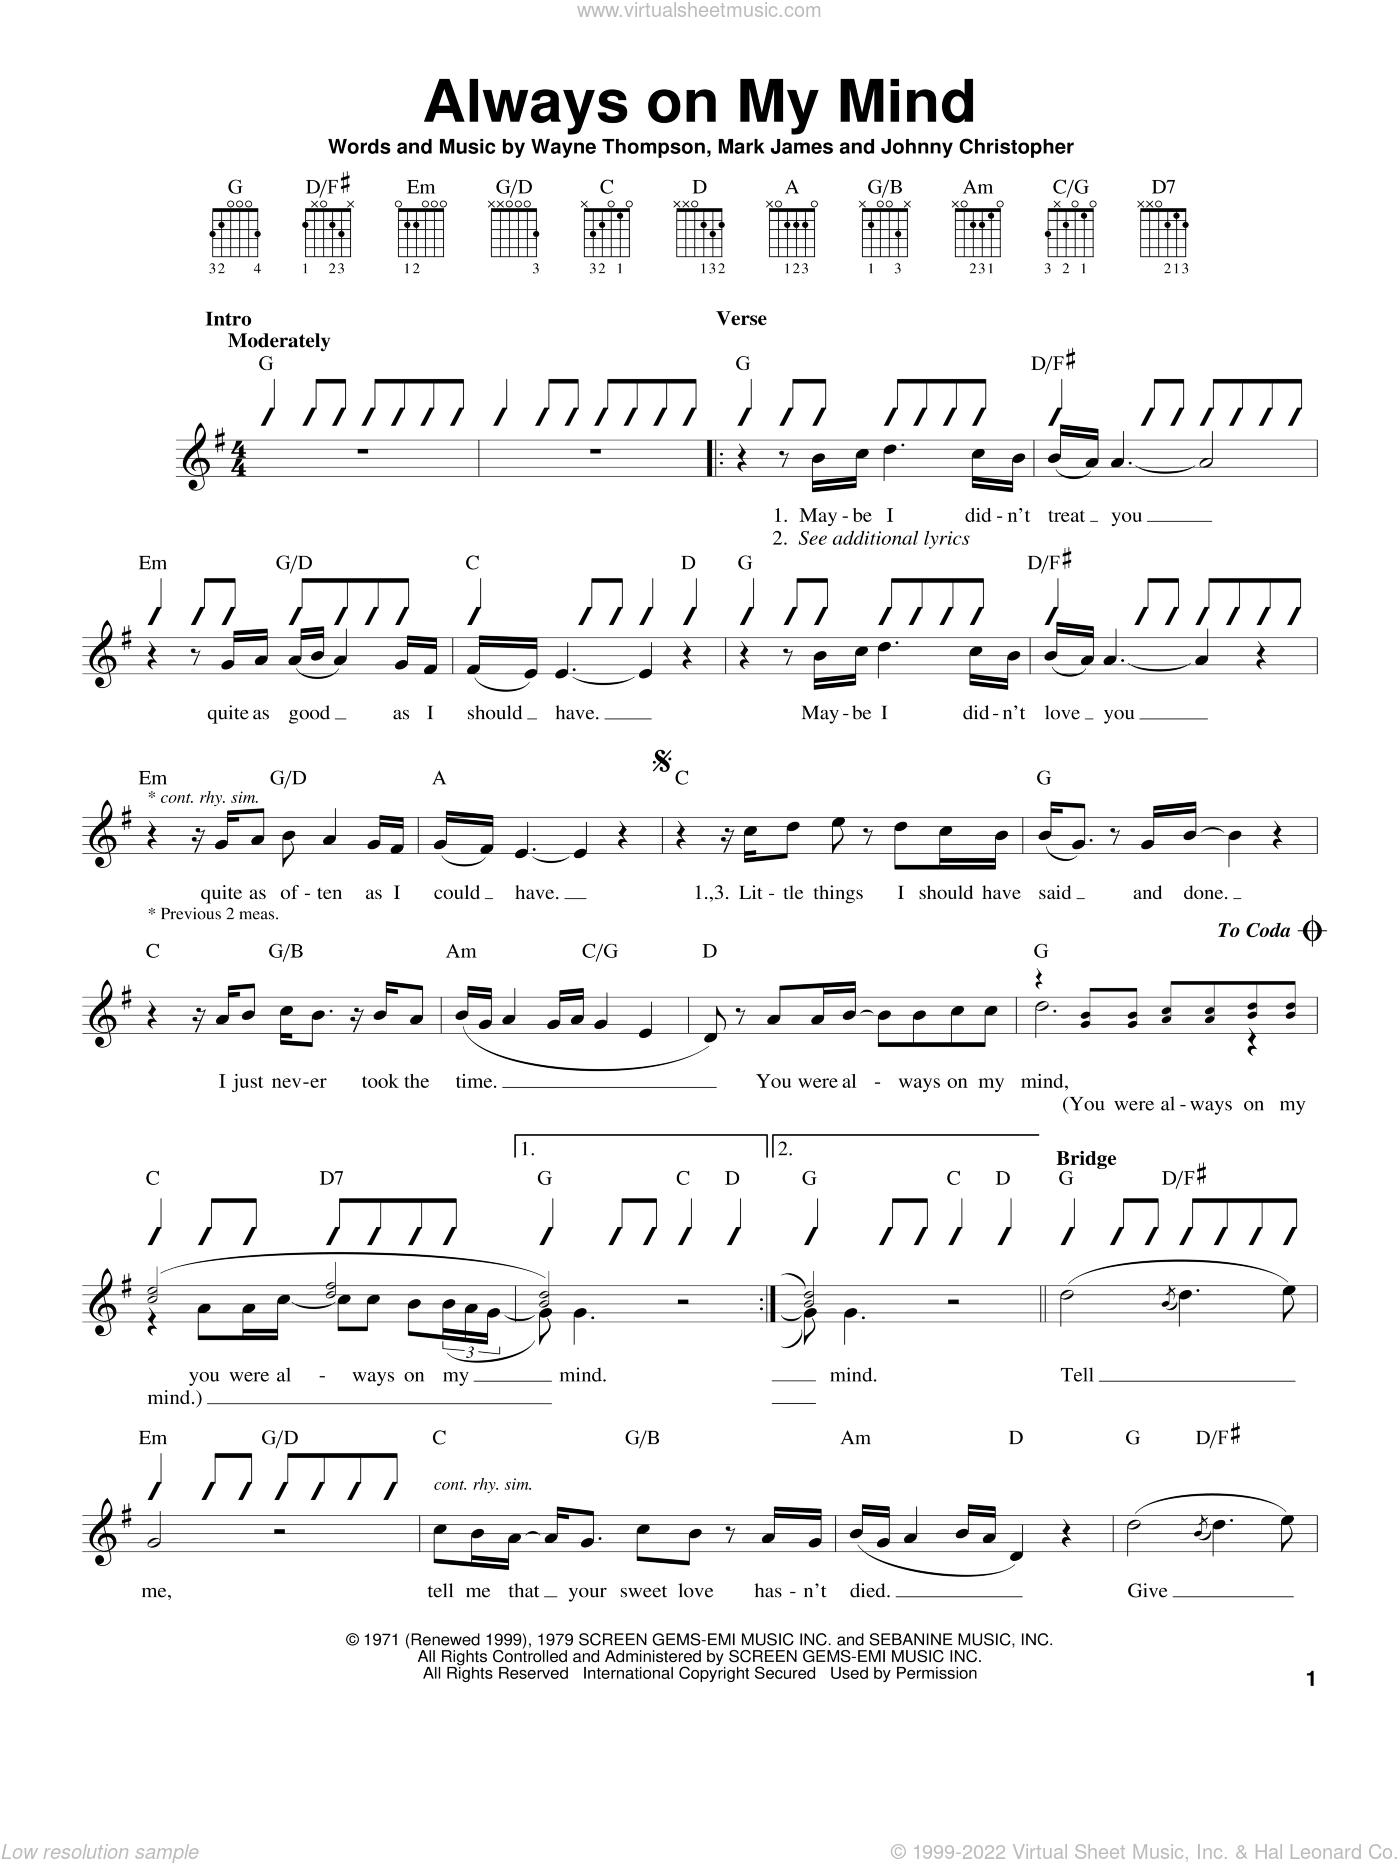 Presley - Always On My Mind sheet music for guitar solo (chords)